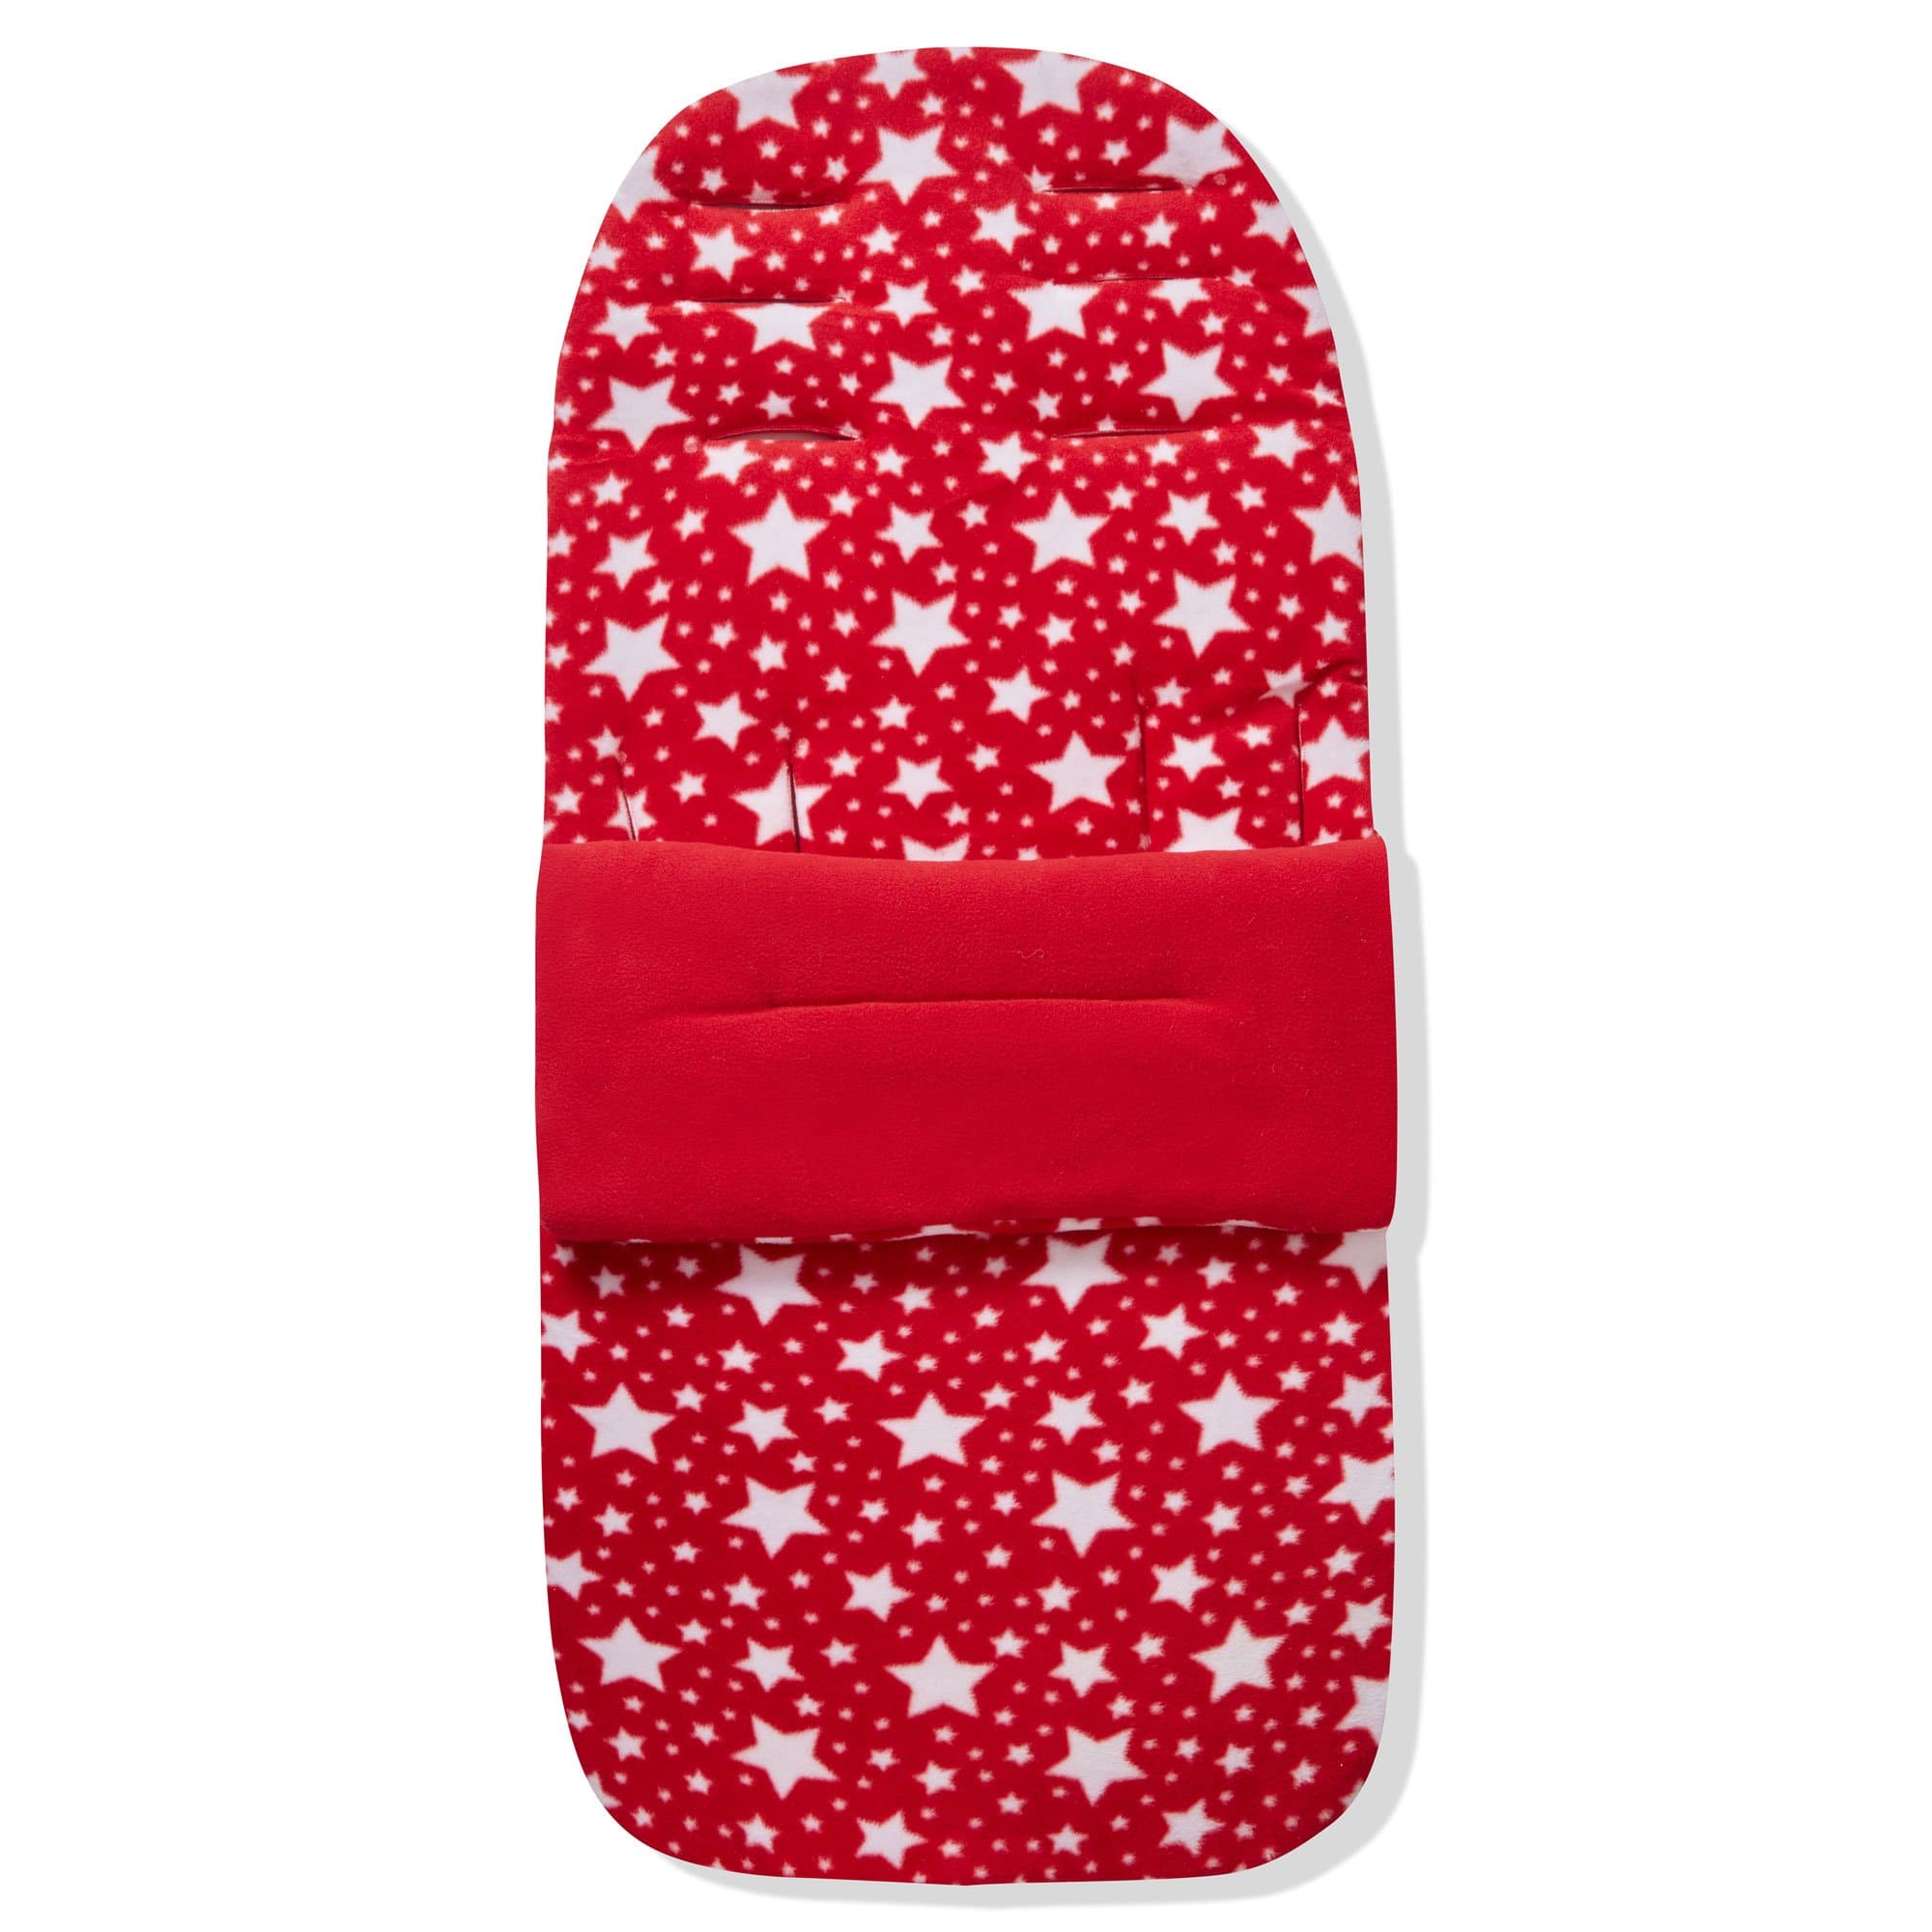 Fleece Footmuff / Cosy Toes Compatible with Casual - Red Star / Fits All Models | For Your Little One